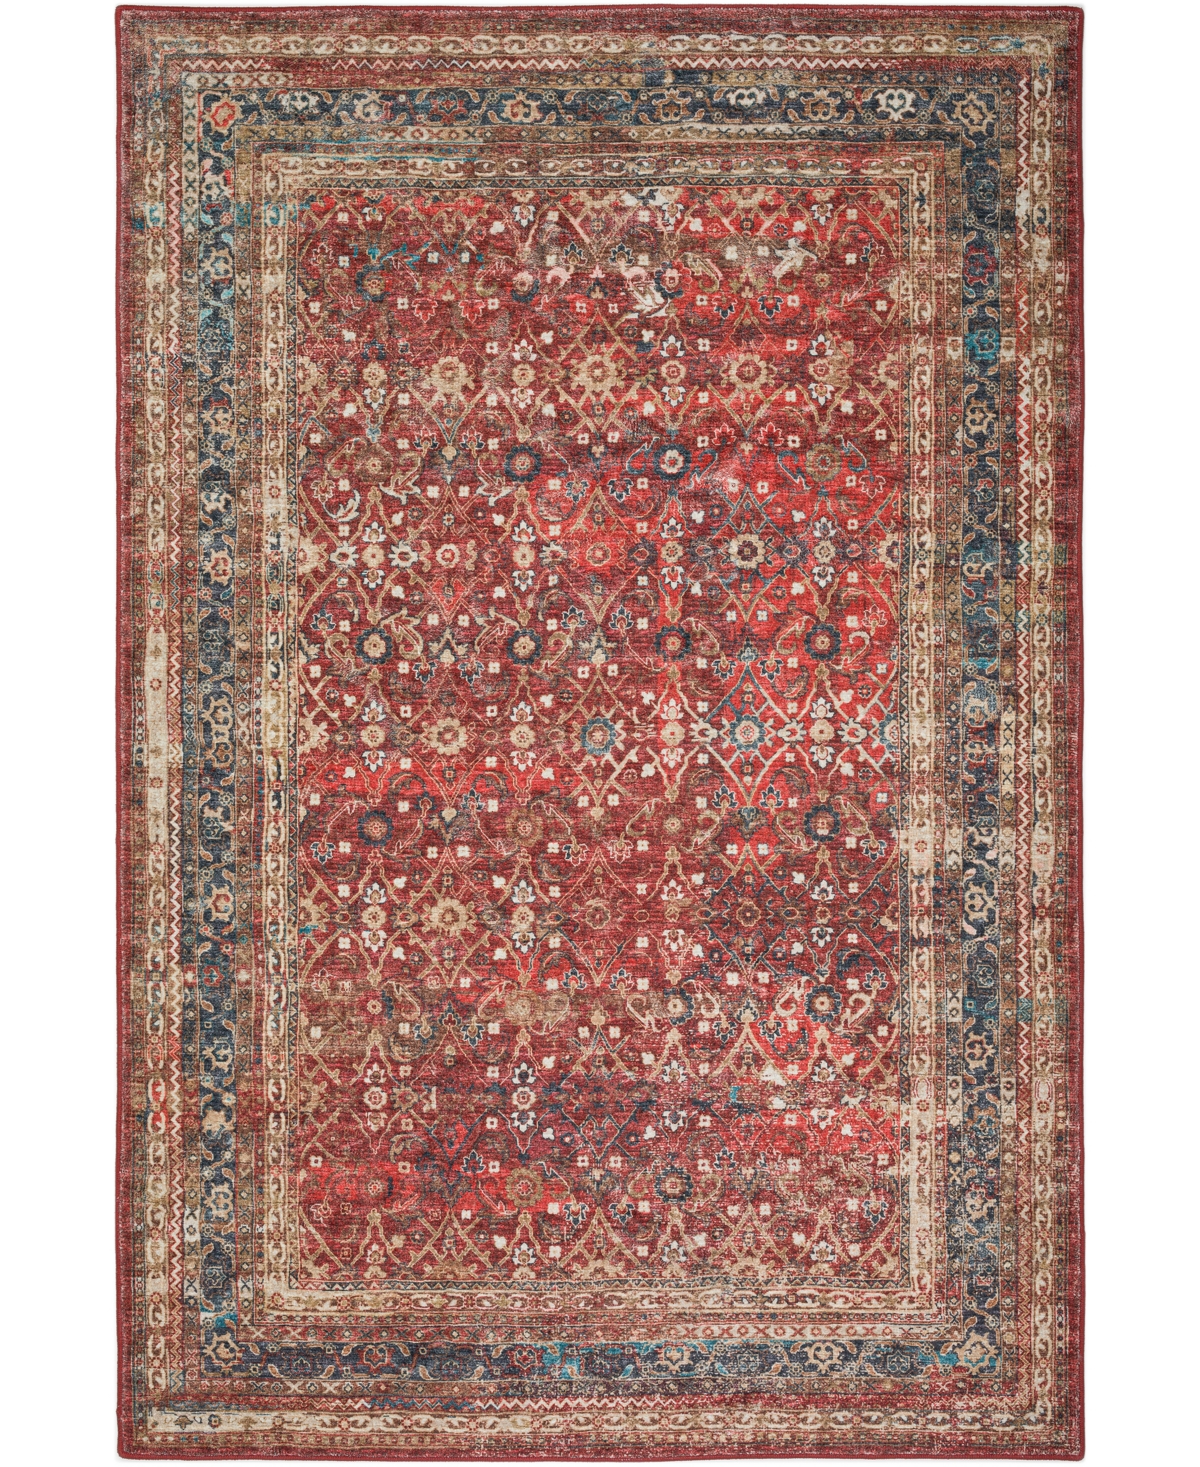 D Style Basilic Bas7 8' X 10' Area Rug In Red